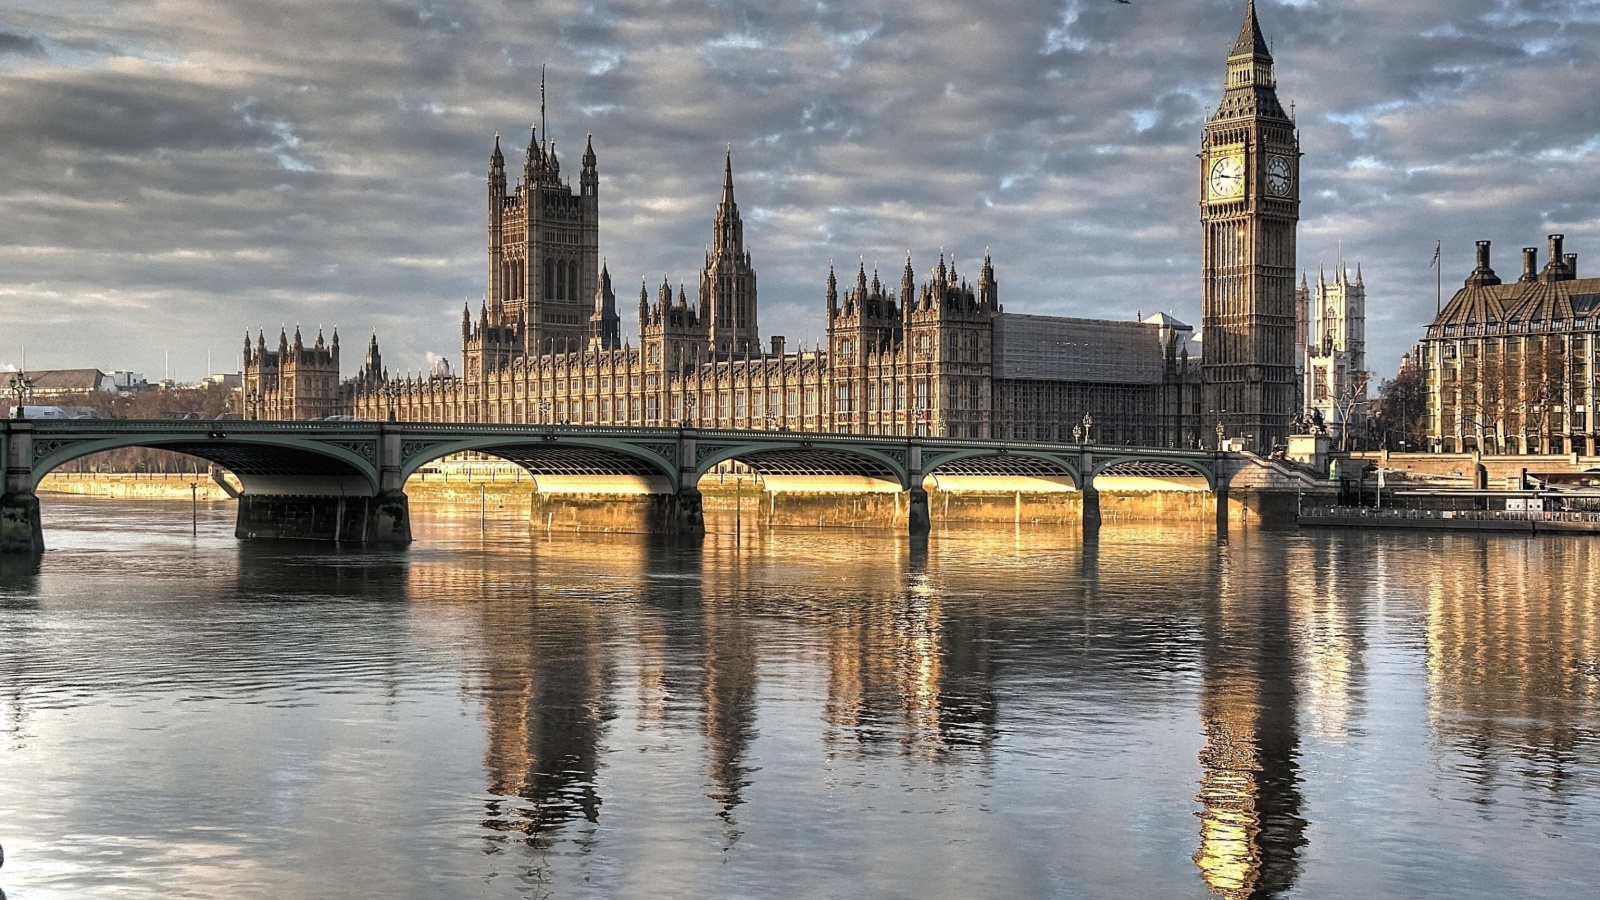 Palace of Westminster in London screenshot #1 1600x900